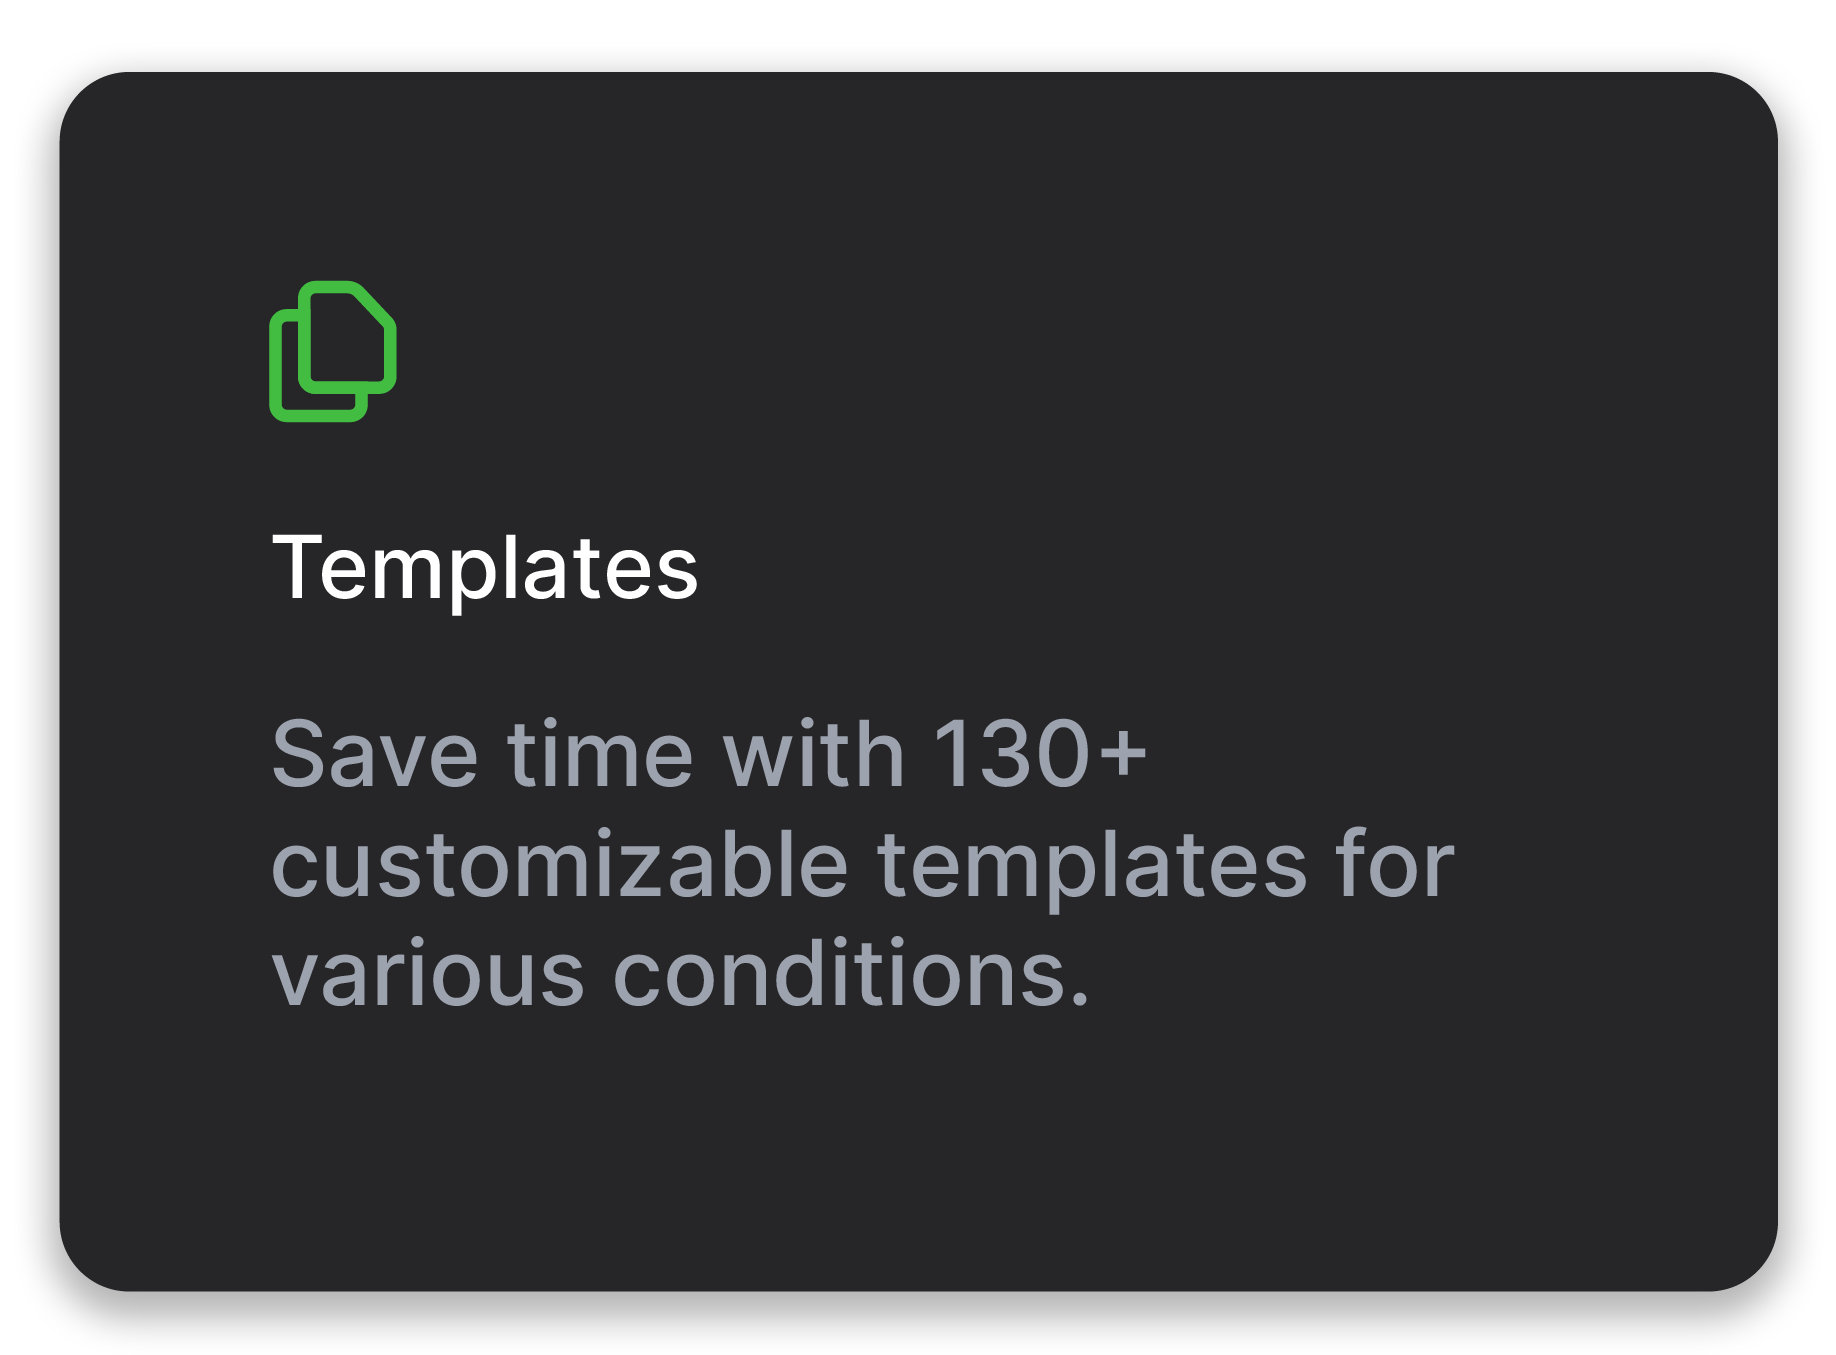 Templates - Save time with 130+ customizable templates for various conditions.